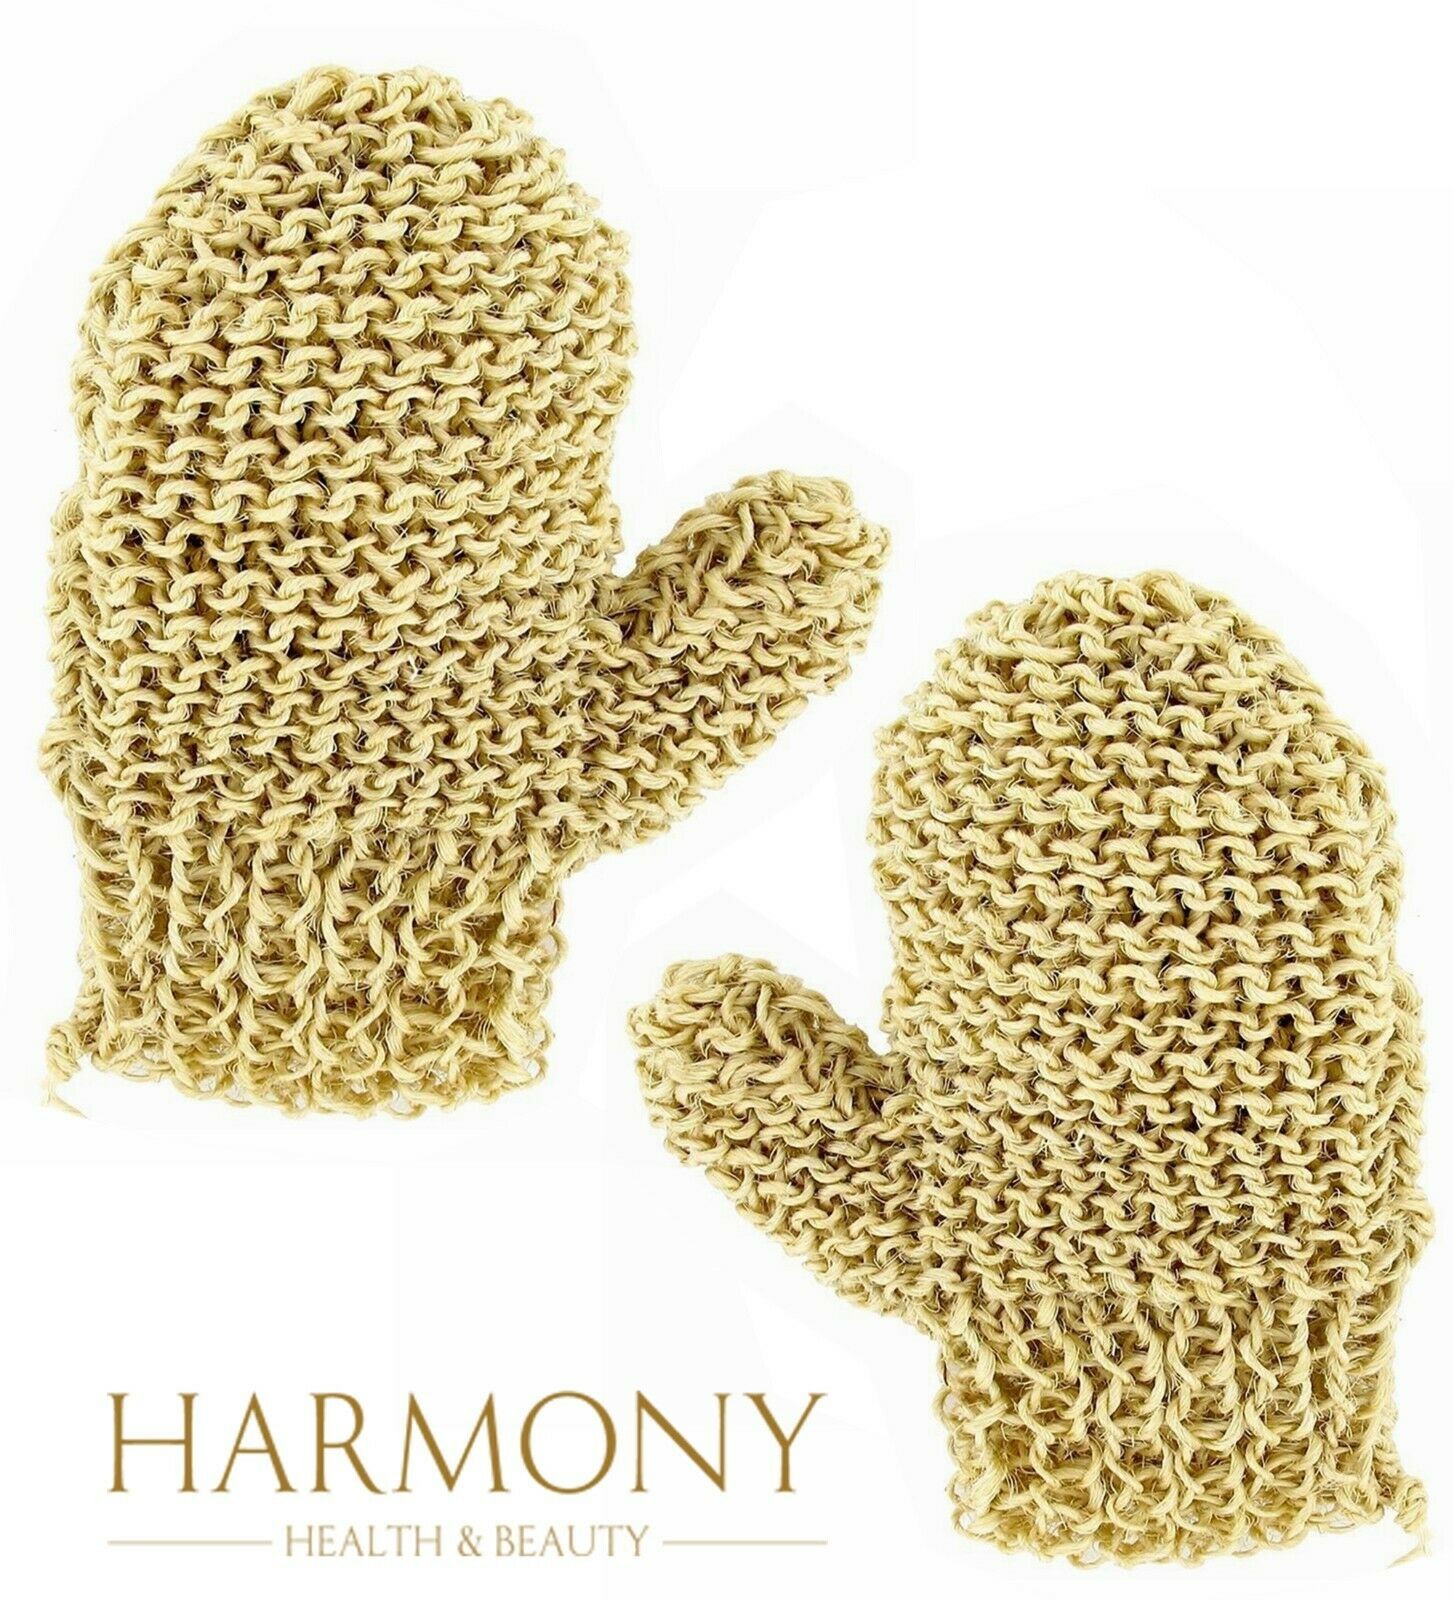 2 X Forster's Natural Sisal & Aloe Massage Glove With Thumb